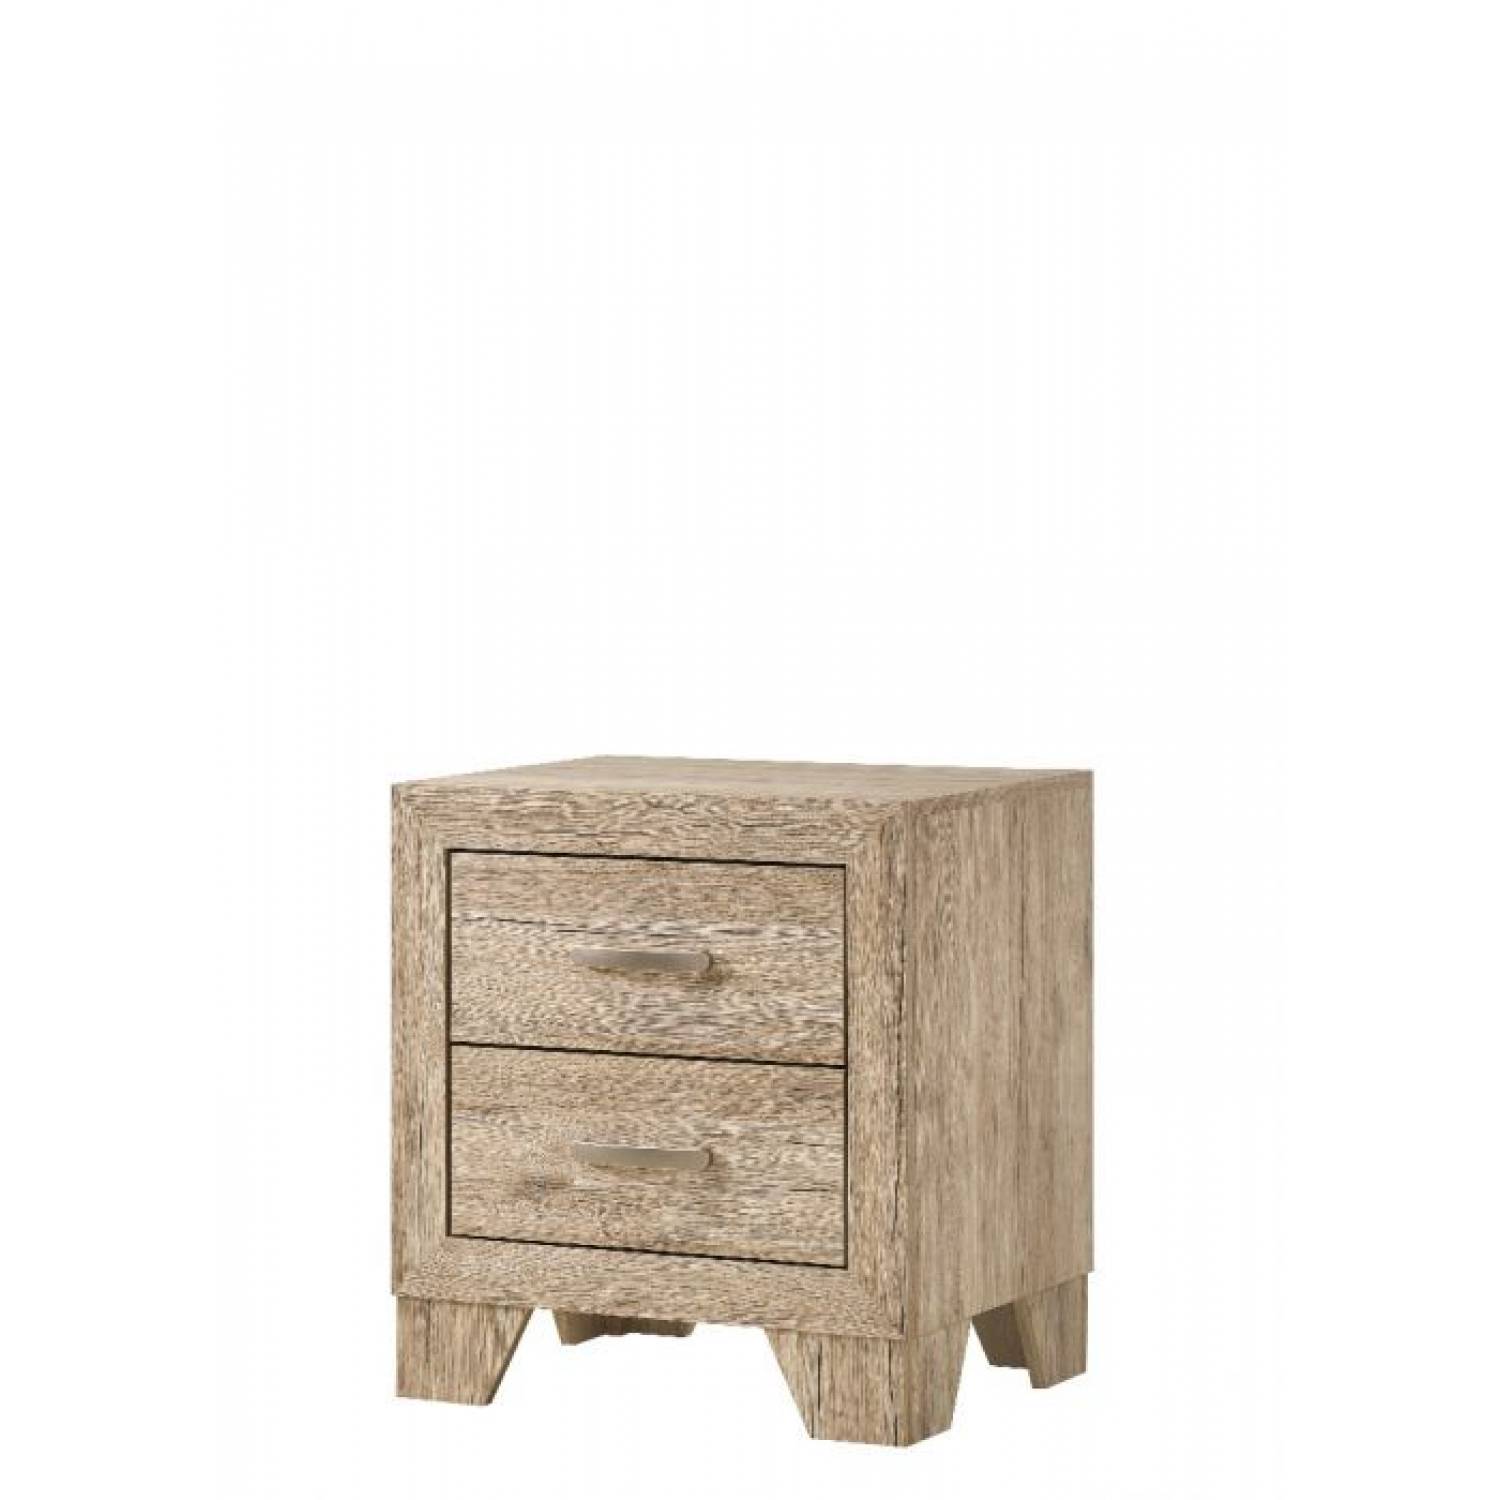 Moda Furnishings Miquell Nightstand, Natural